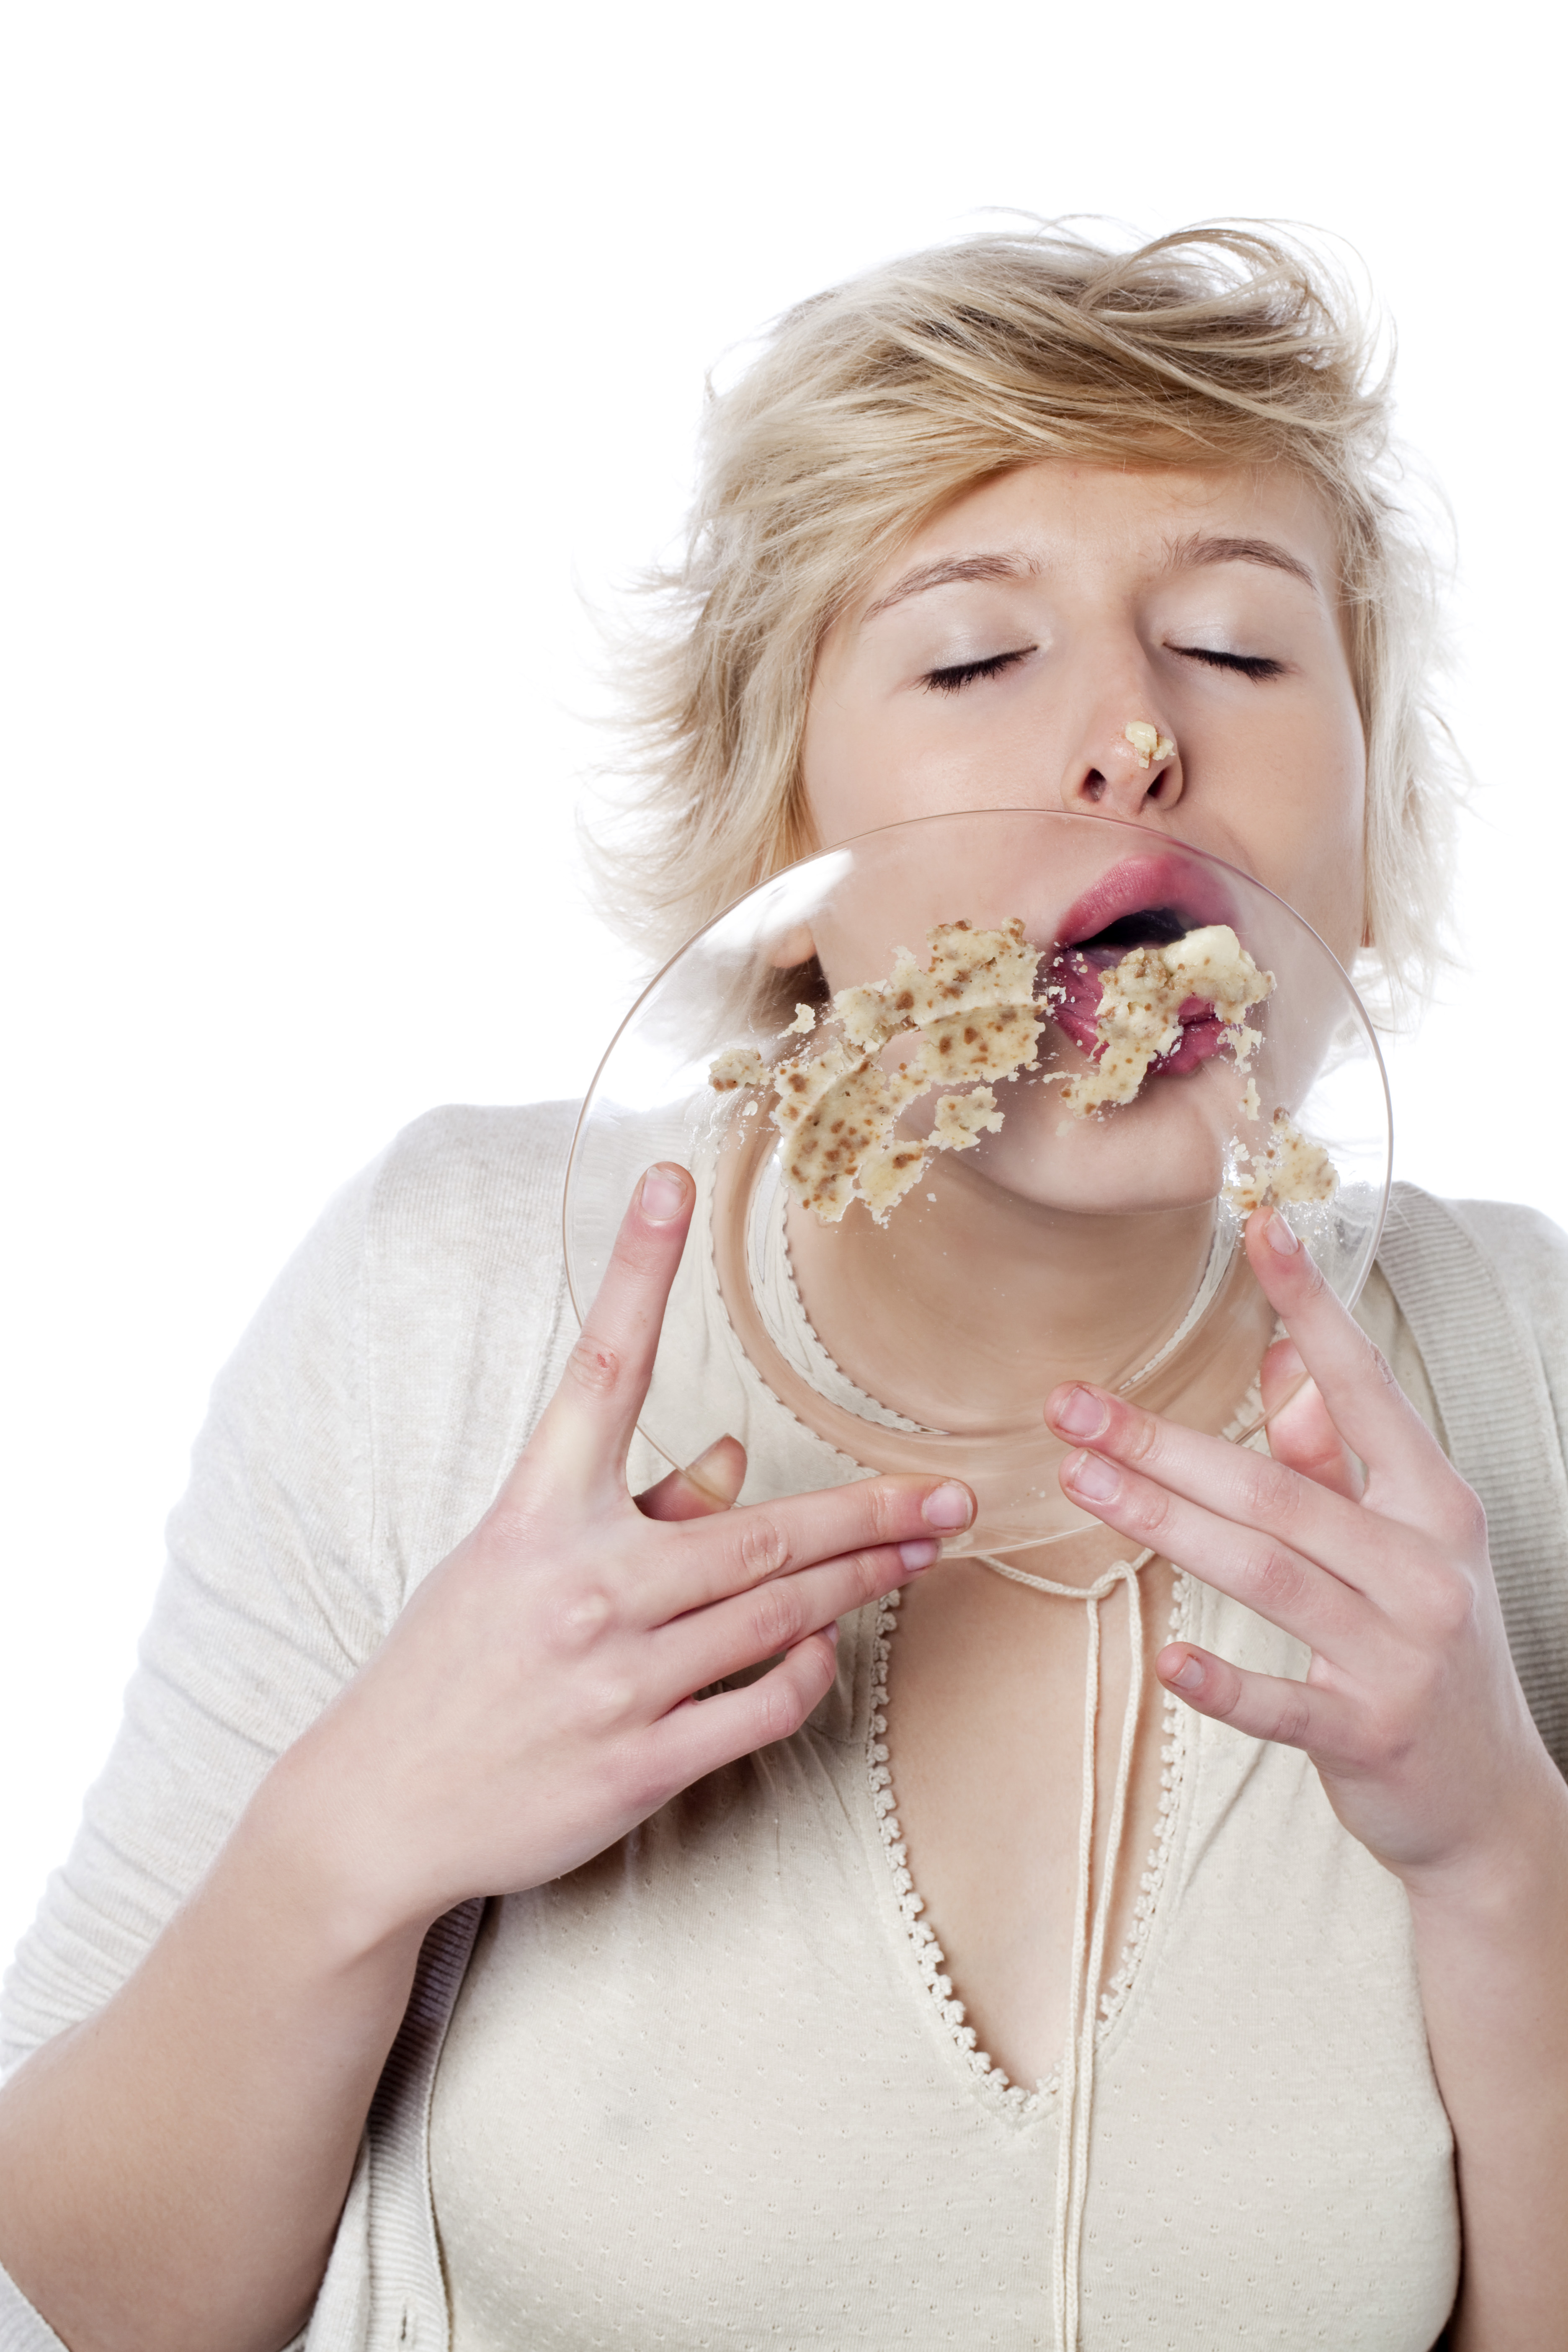 How to Stop Comfort Eating – Mindful Eating